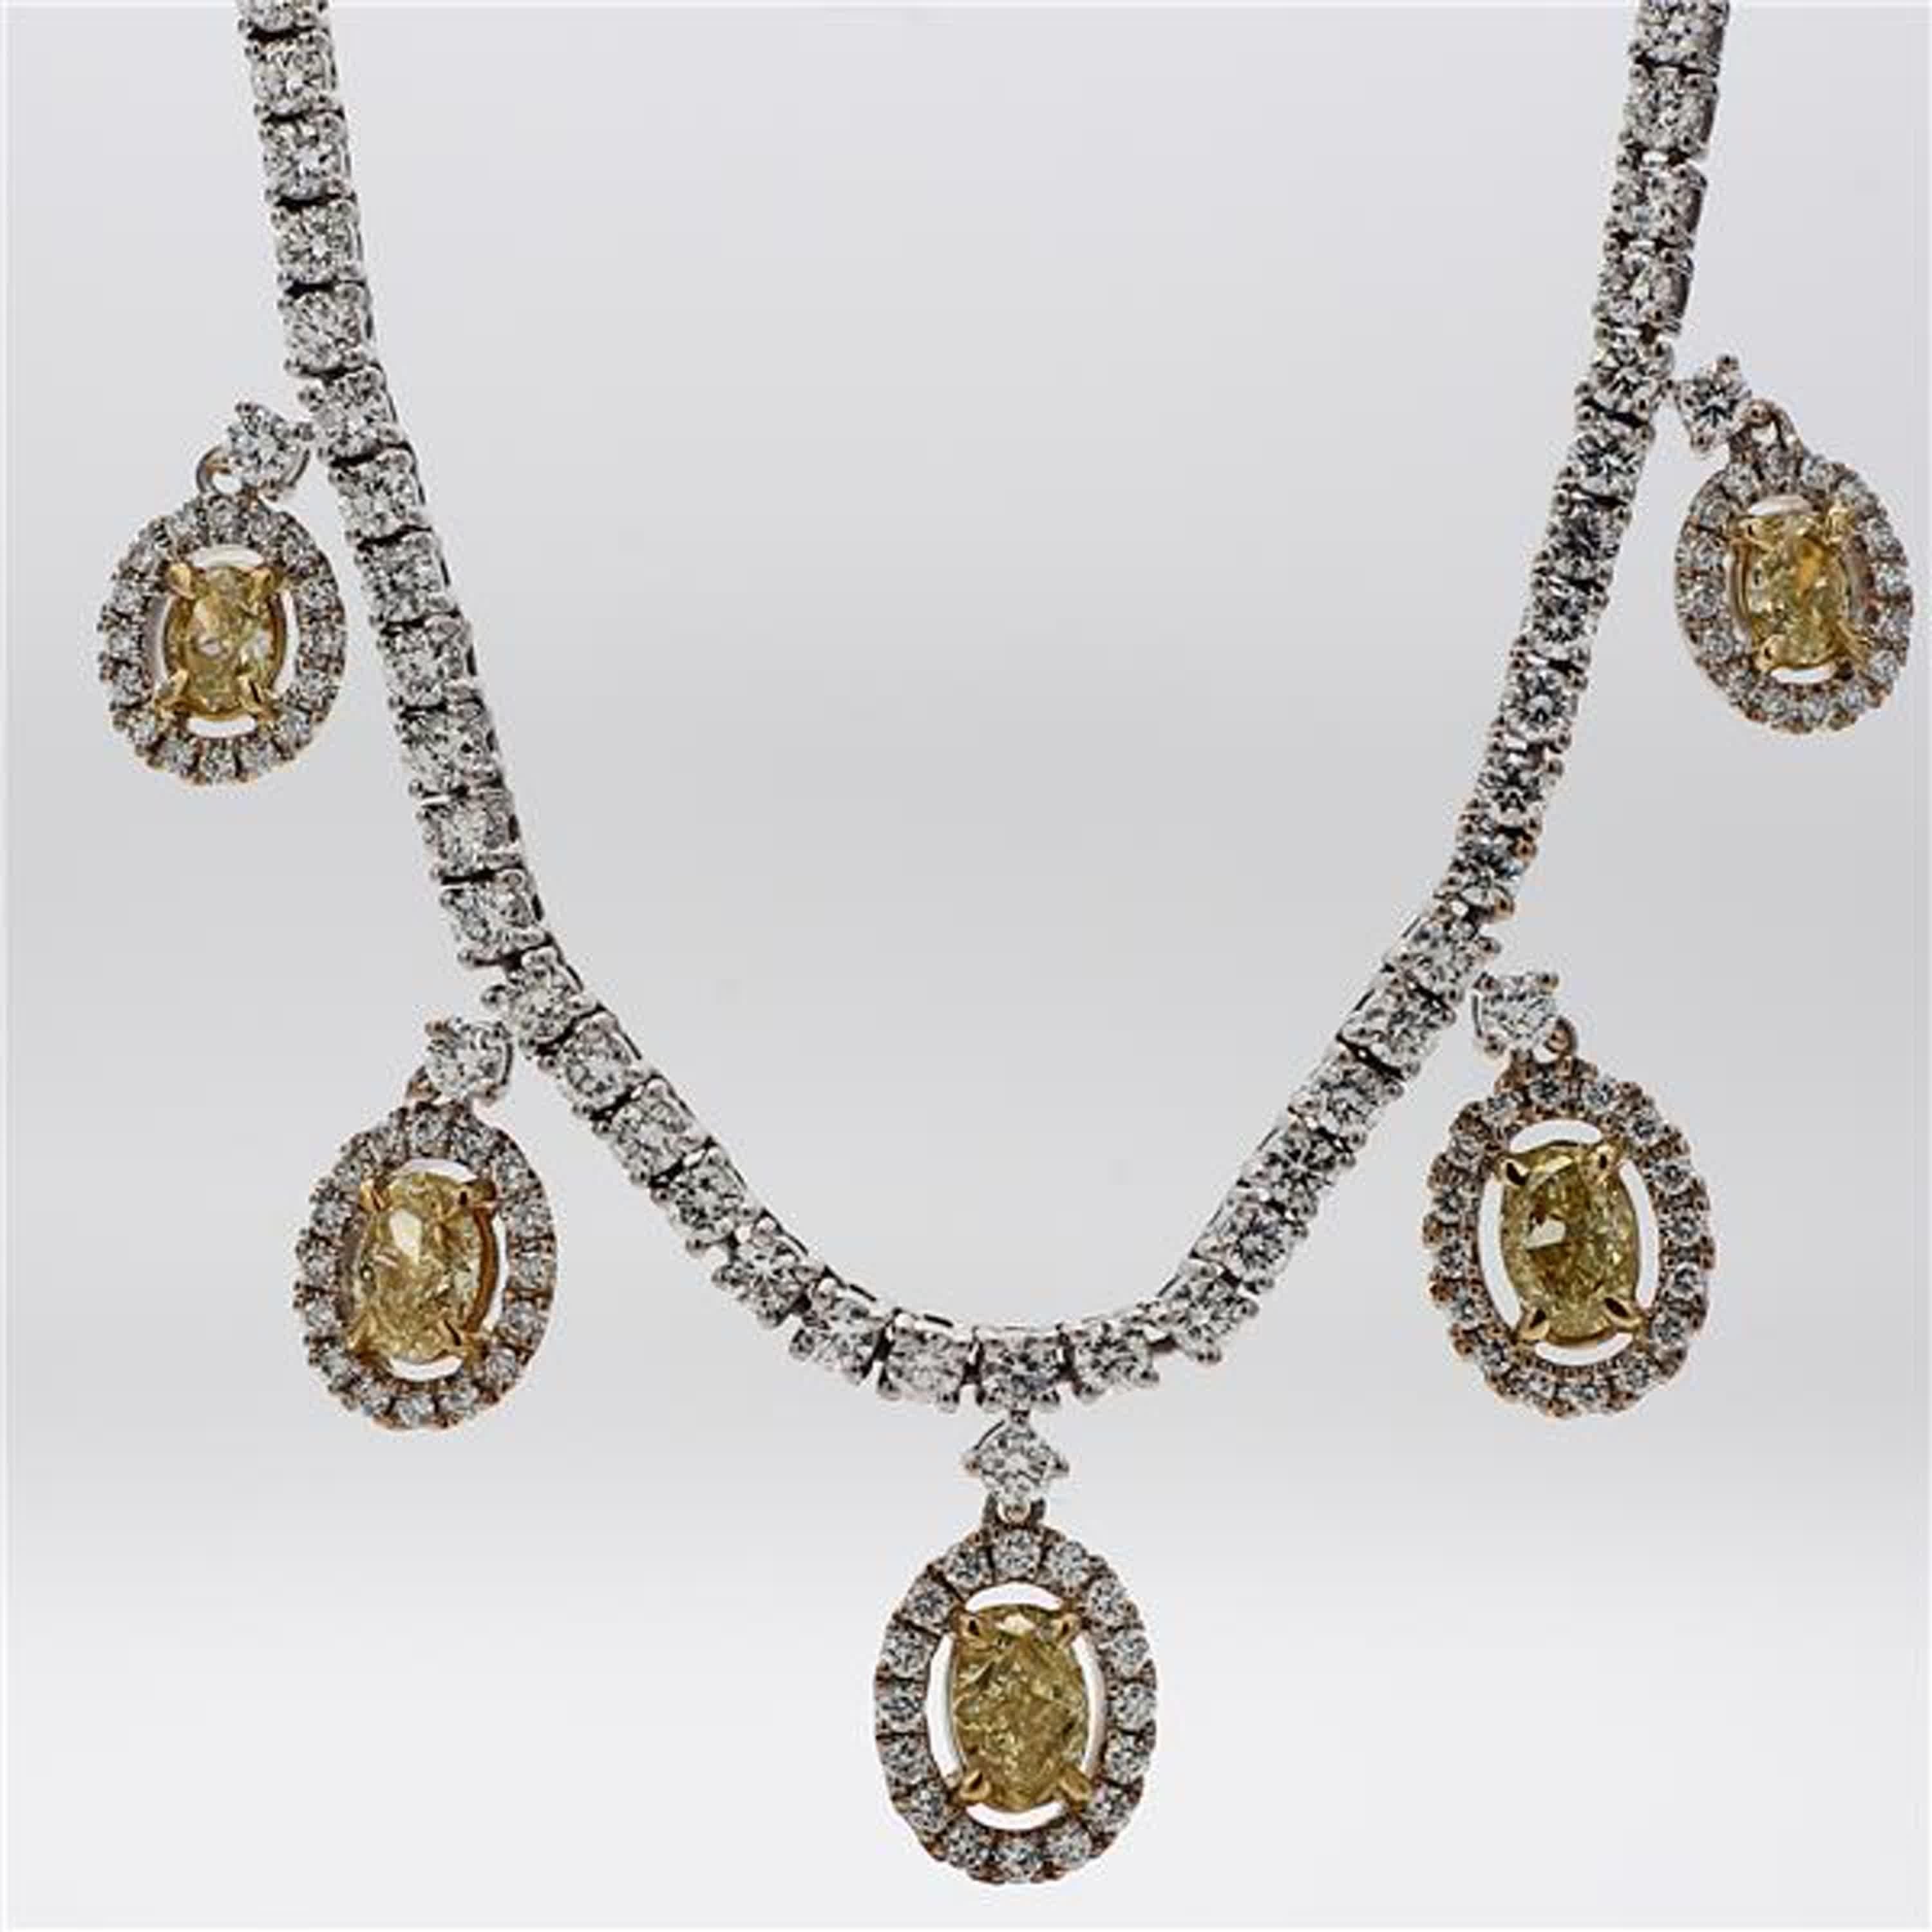 RareGemWorld's classic diamond necklace. Mounted in a beautiful 18K Yellow and White Gold setting with natural oval cut yellow diamonds. The yellow diamonds are surrounded by small round natural white diamond melee as well as diamonds throughout the